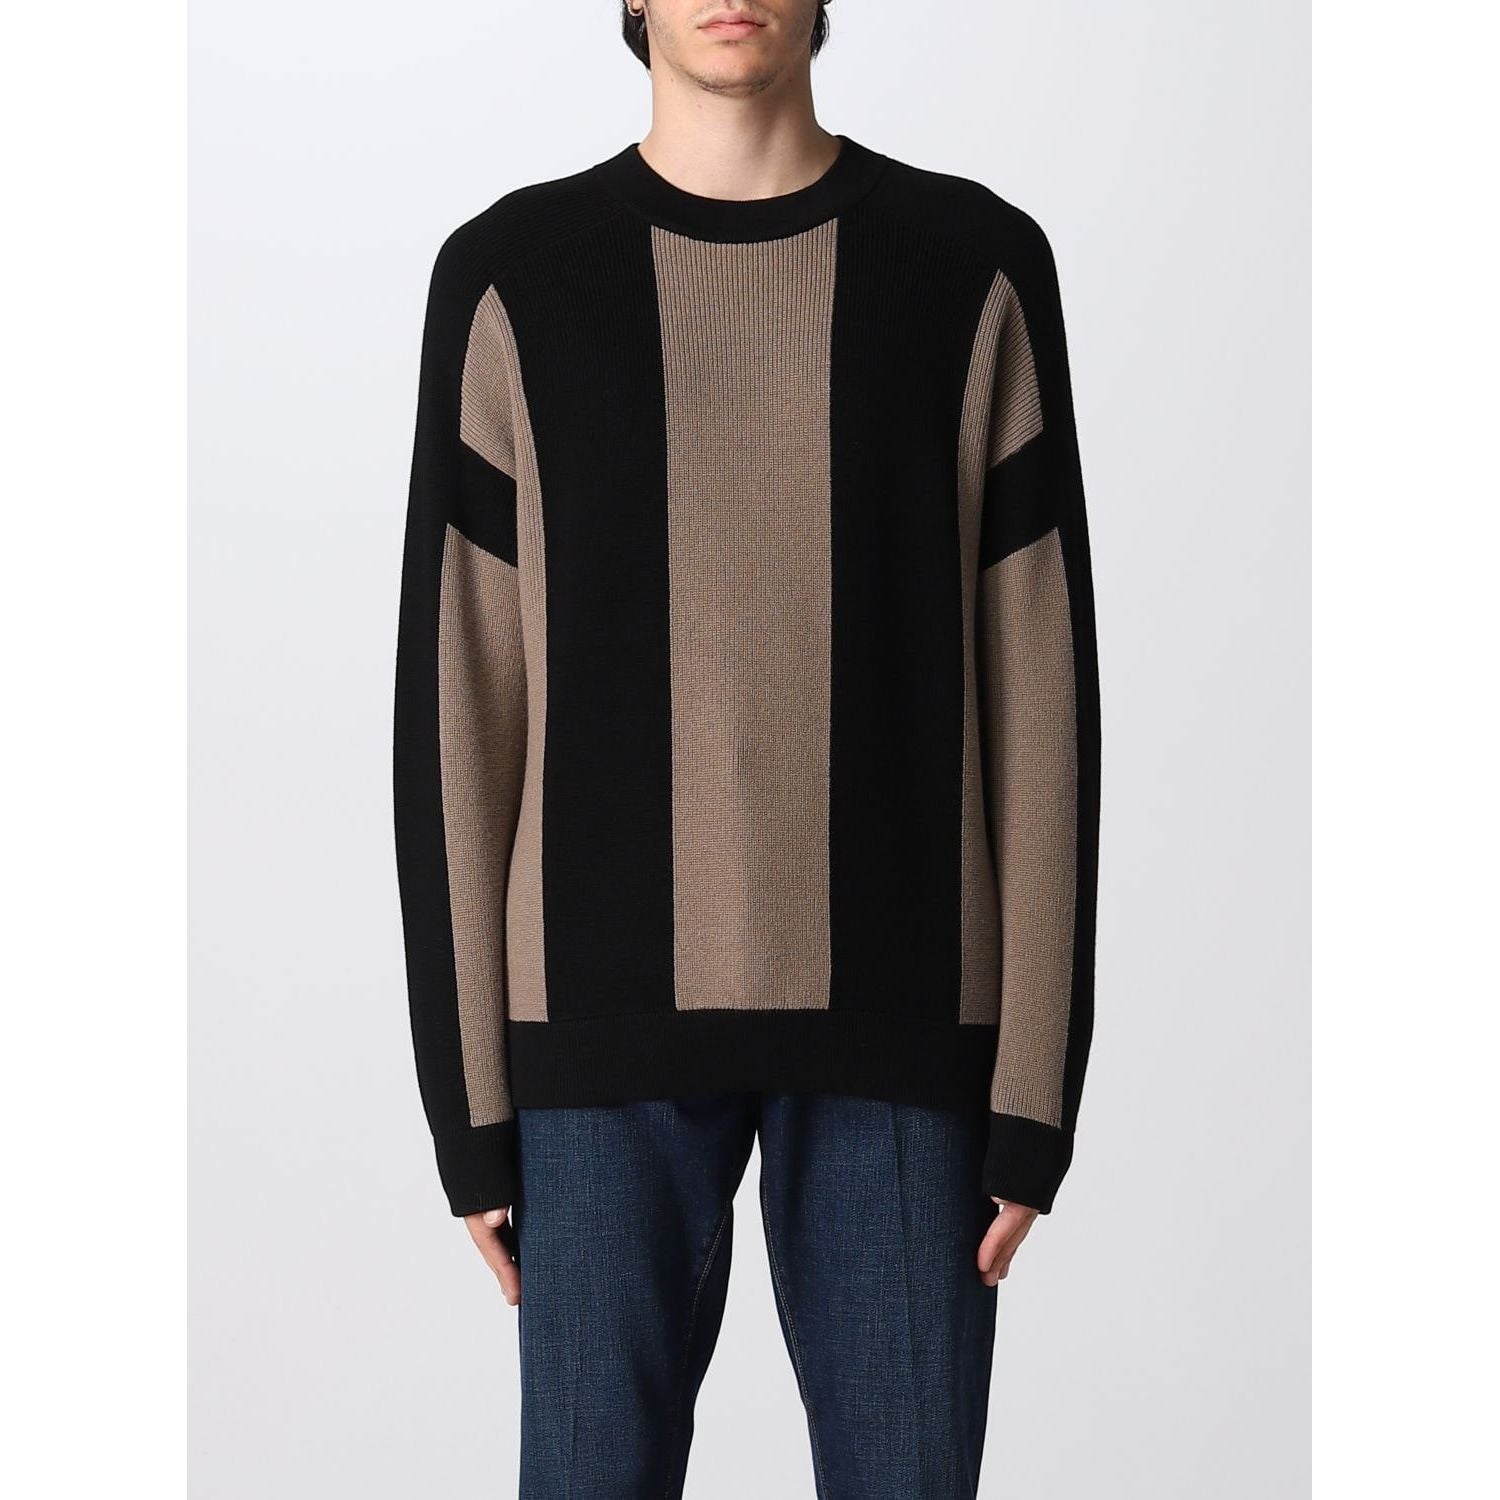 EMPORIO ARMANI VIRGIN WOOL BLEND JUMPER IN CORN-ON-THE-COB STITCH WITH INLAY - Yooto